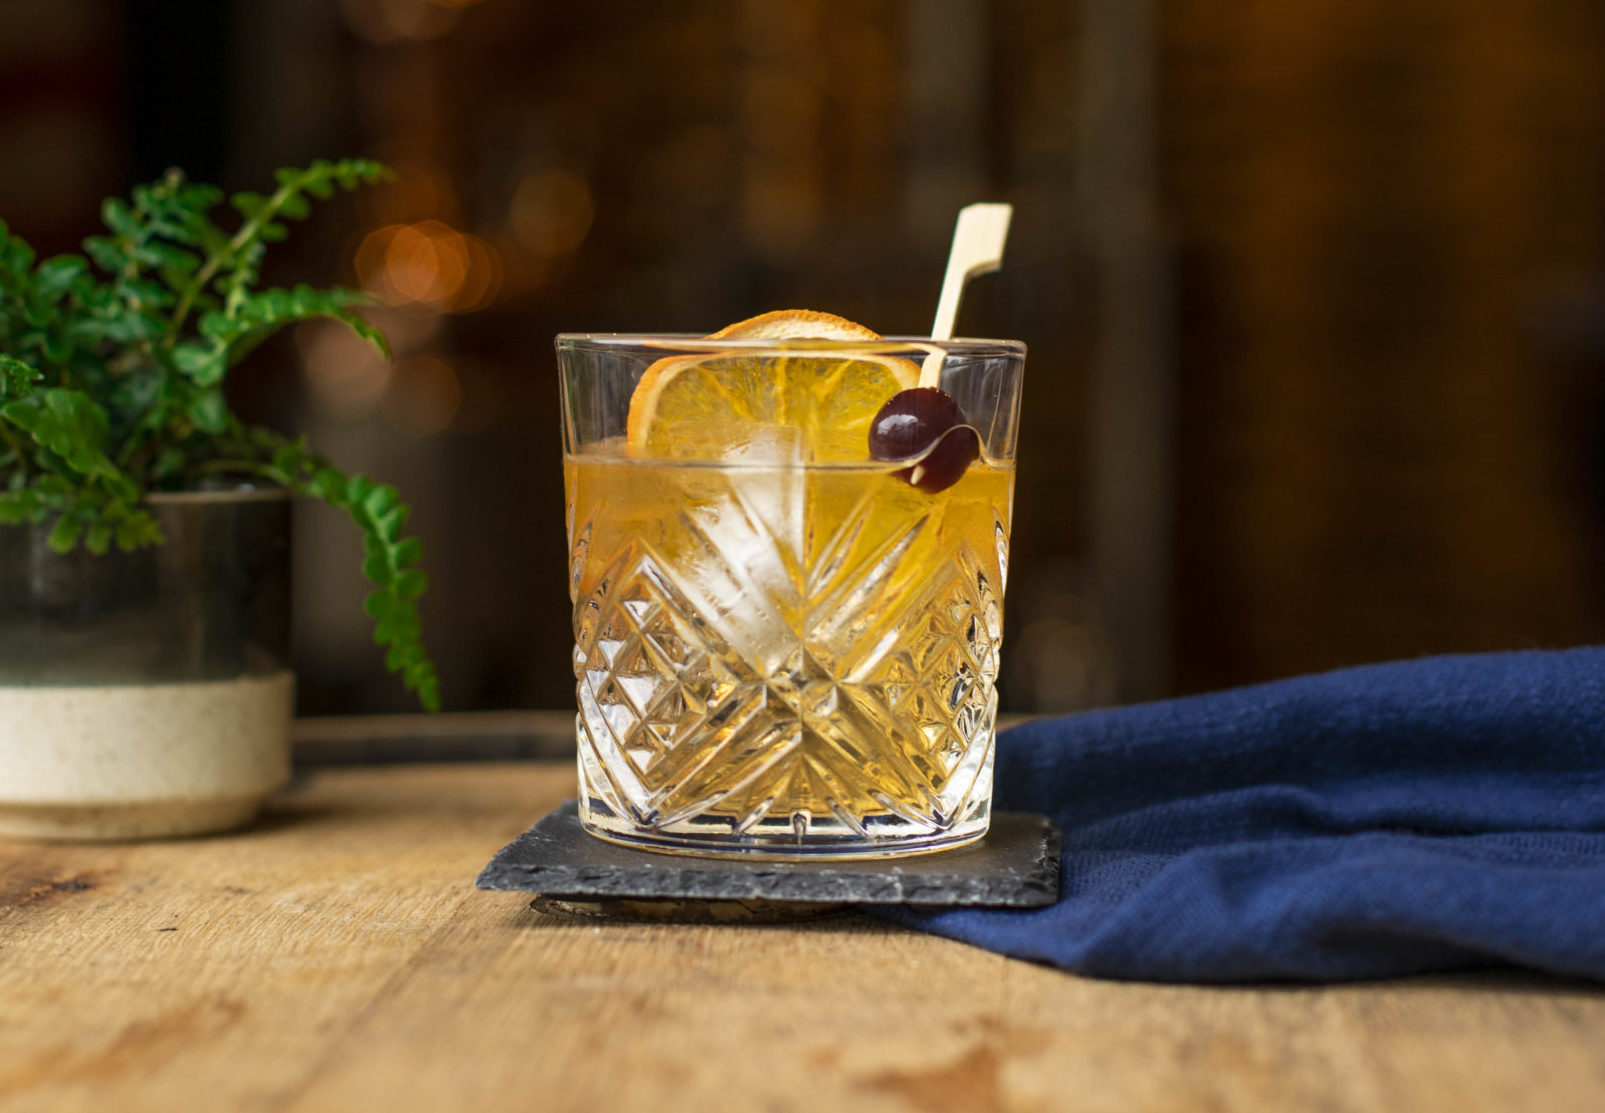 An Old Fashioned whiskey cocktail sits atop a wooden barrel with a stone coaster underneath and a royal blue napkin next to the drink. The cocktail has one large ice cube in it, as well as a slice of dried orange, and a bourbon cherry on a swizzle stick